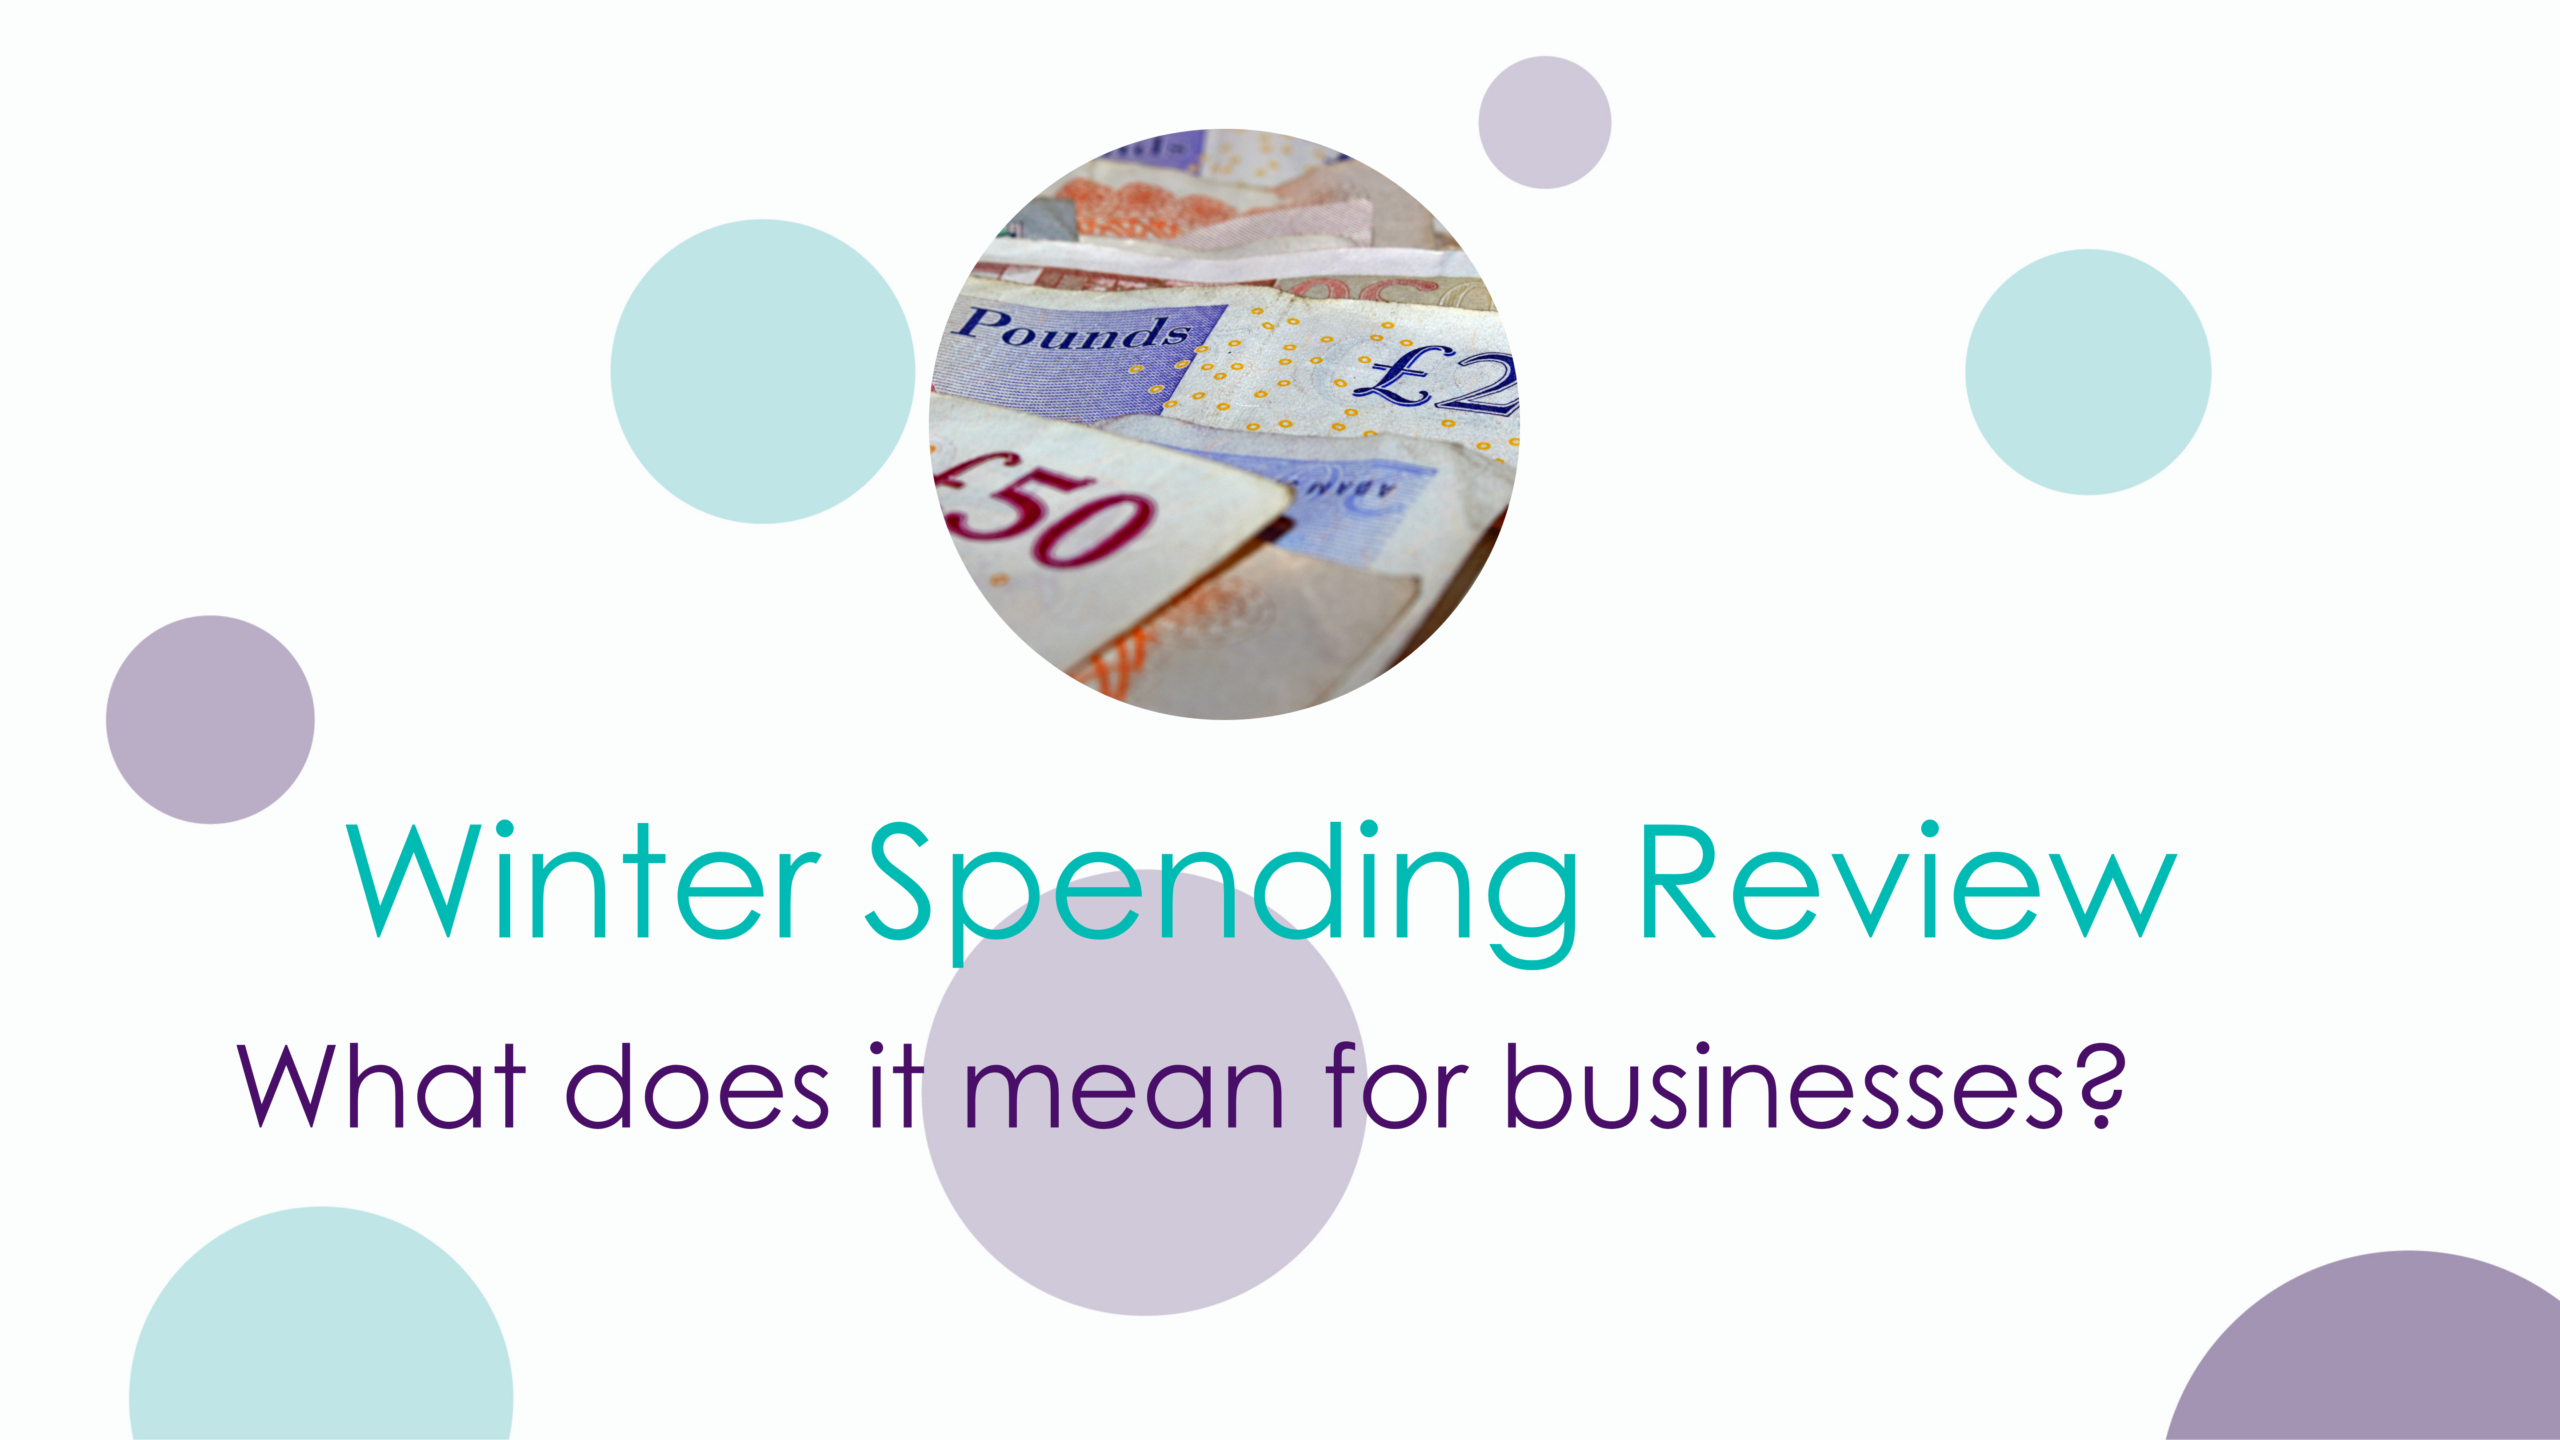 Chancellor’s Winter Spending Review – what does it mean for businesses?